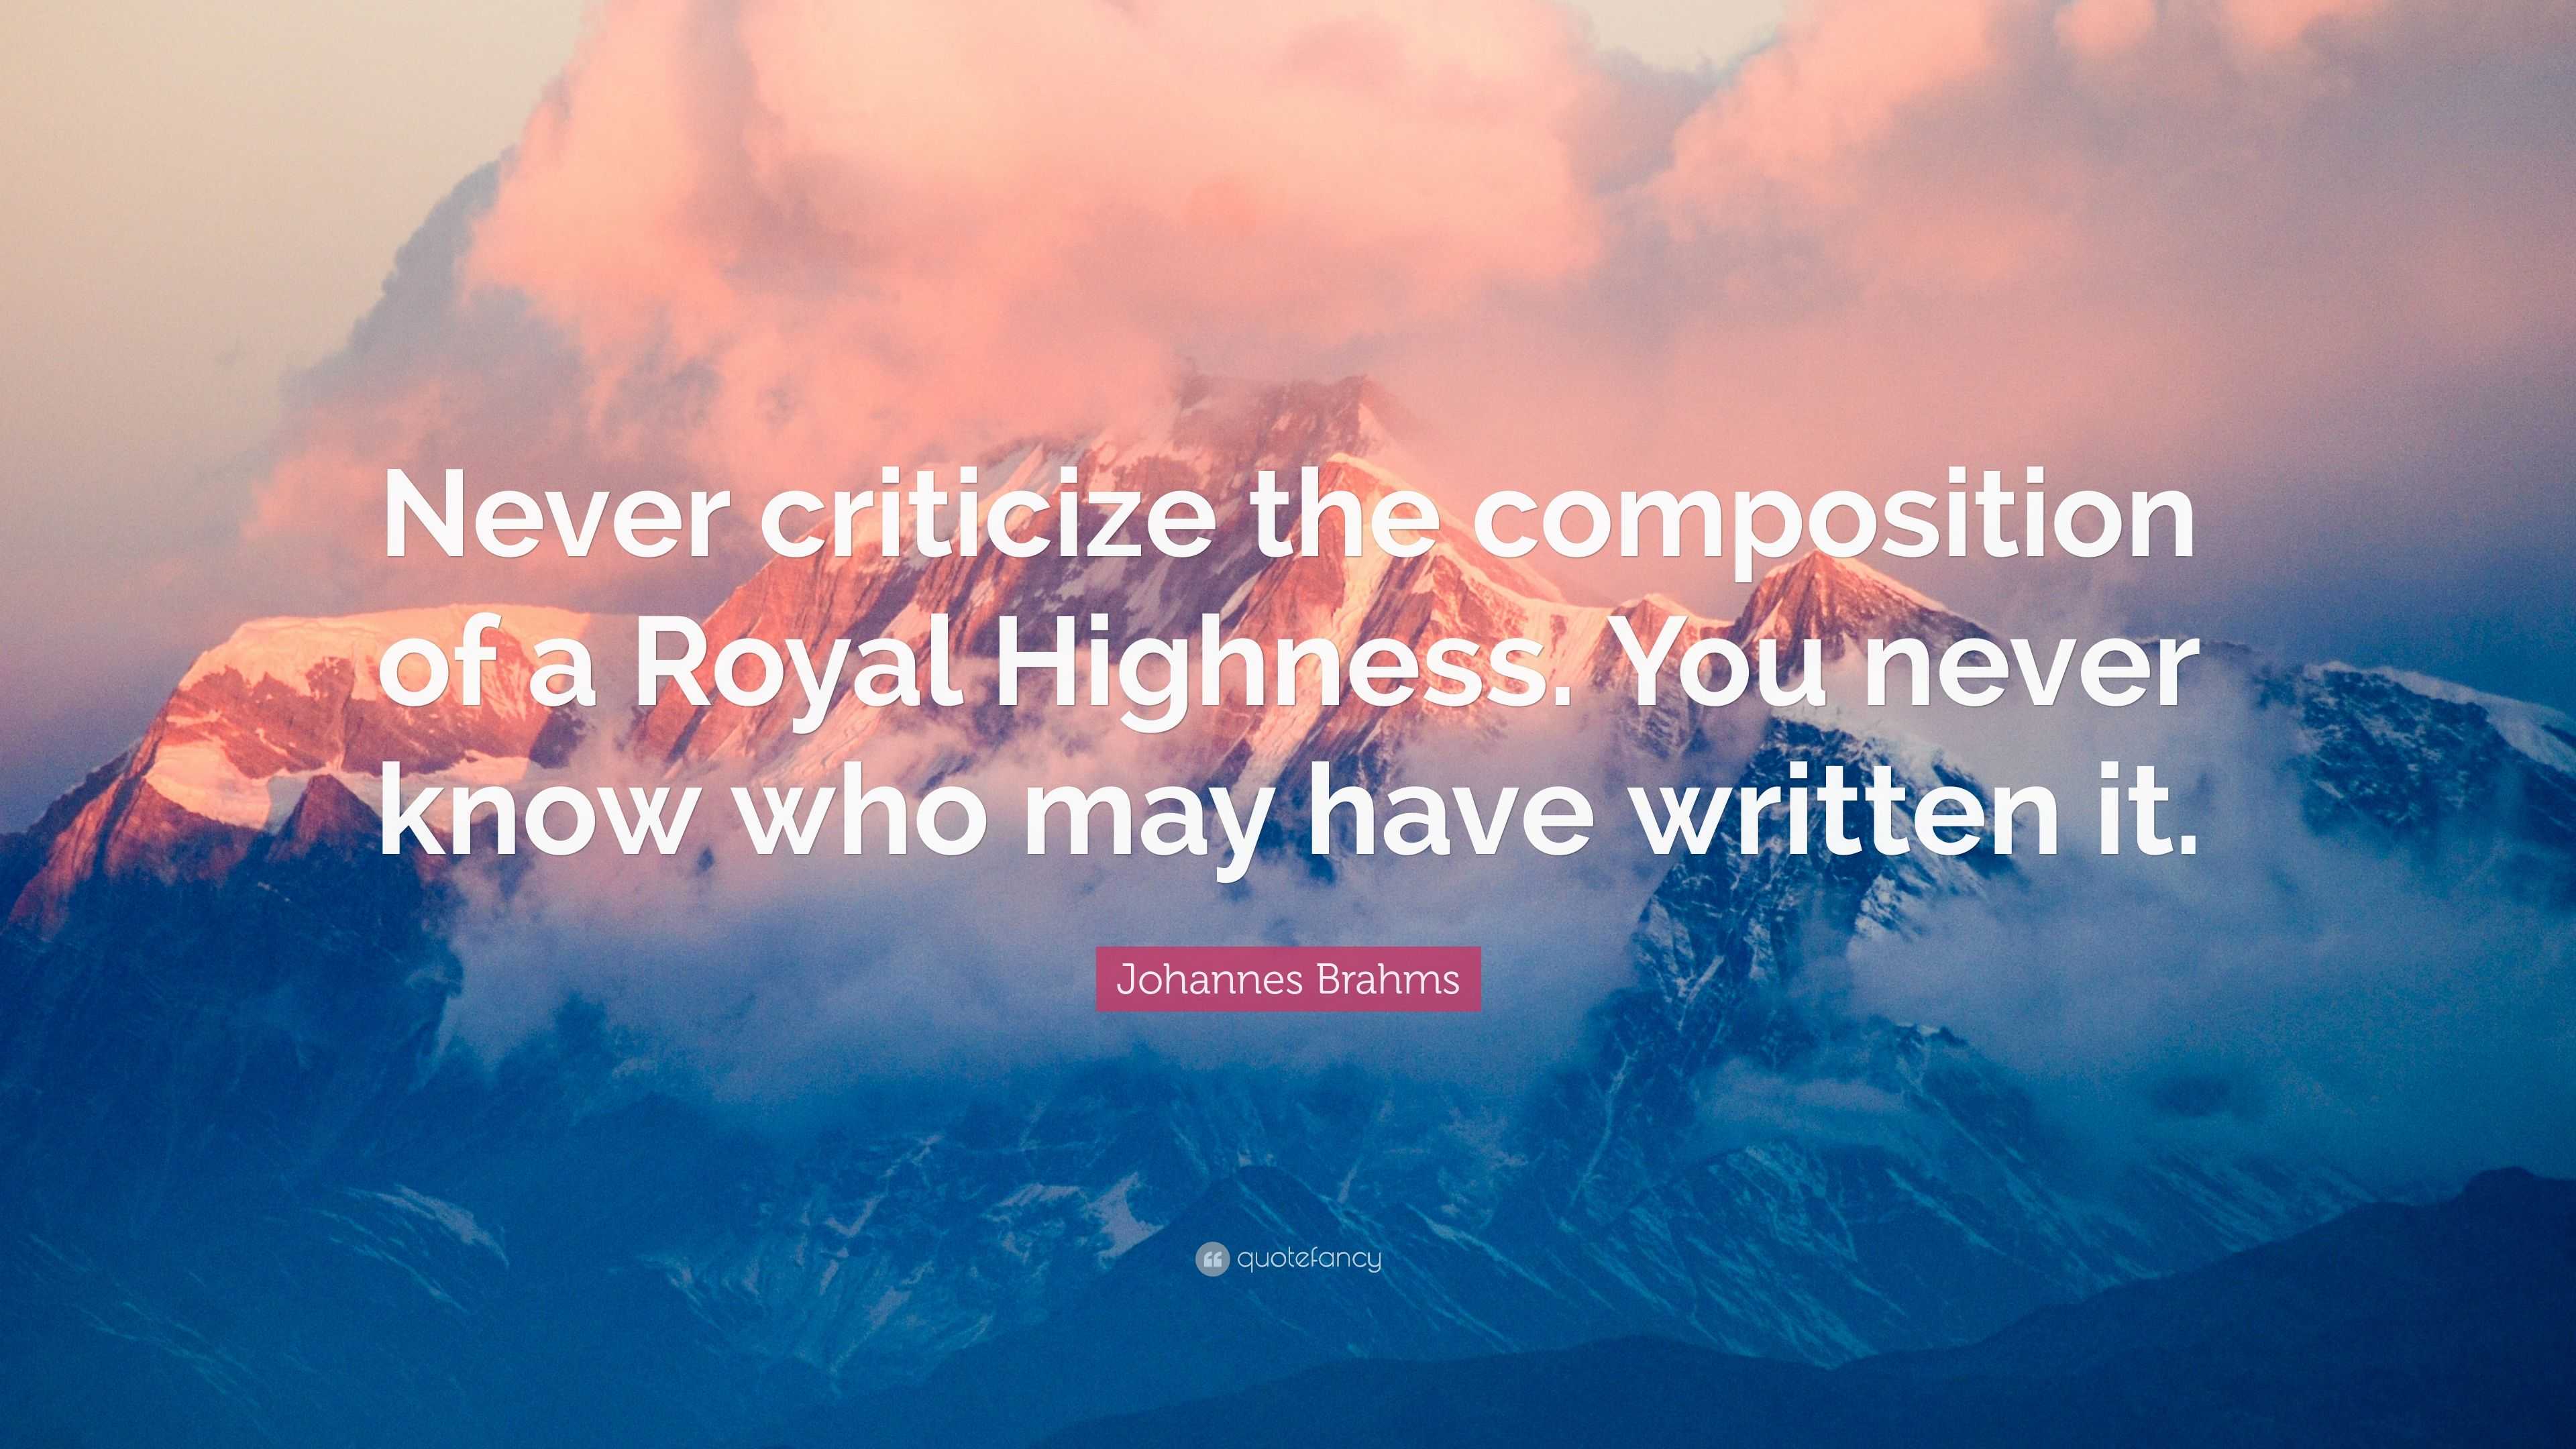 Johannes Brahms Quote: "Never criticize the composition of a Royal Highness. You never know who ...